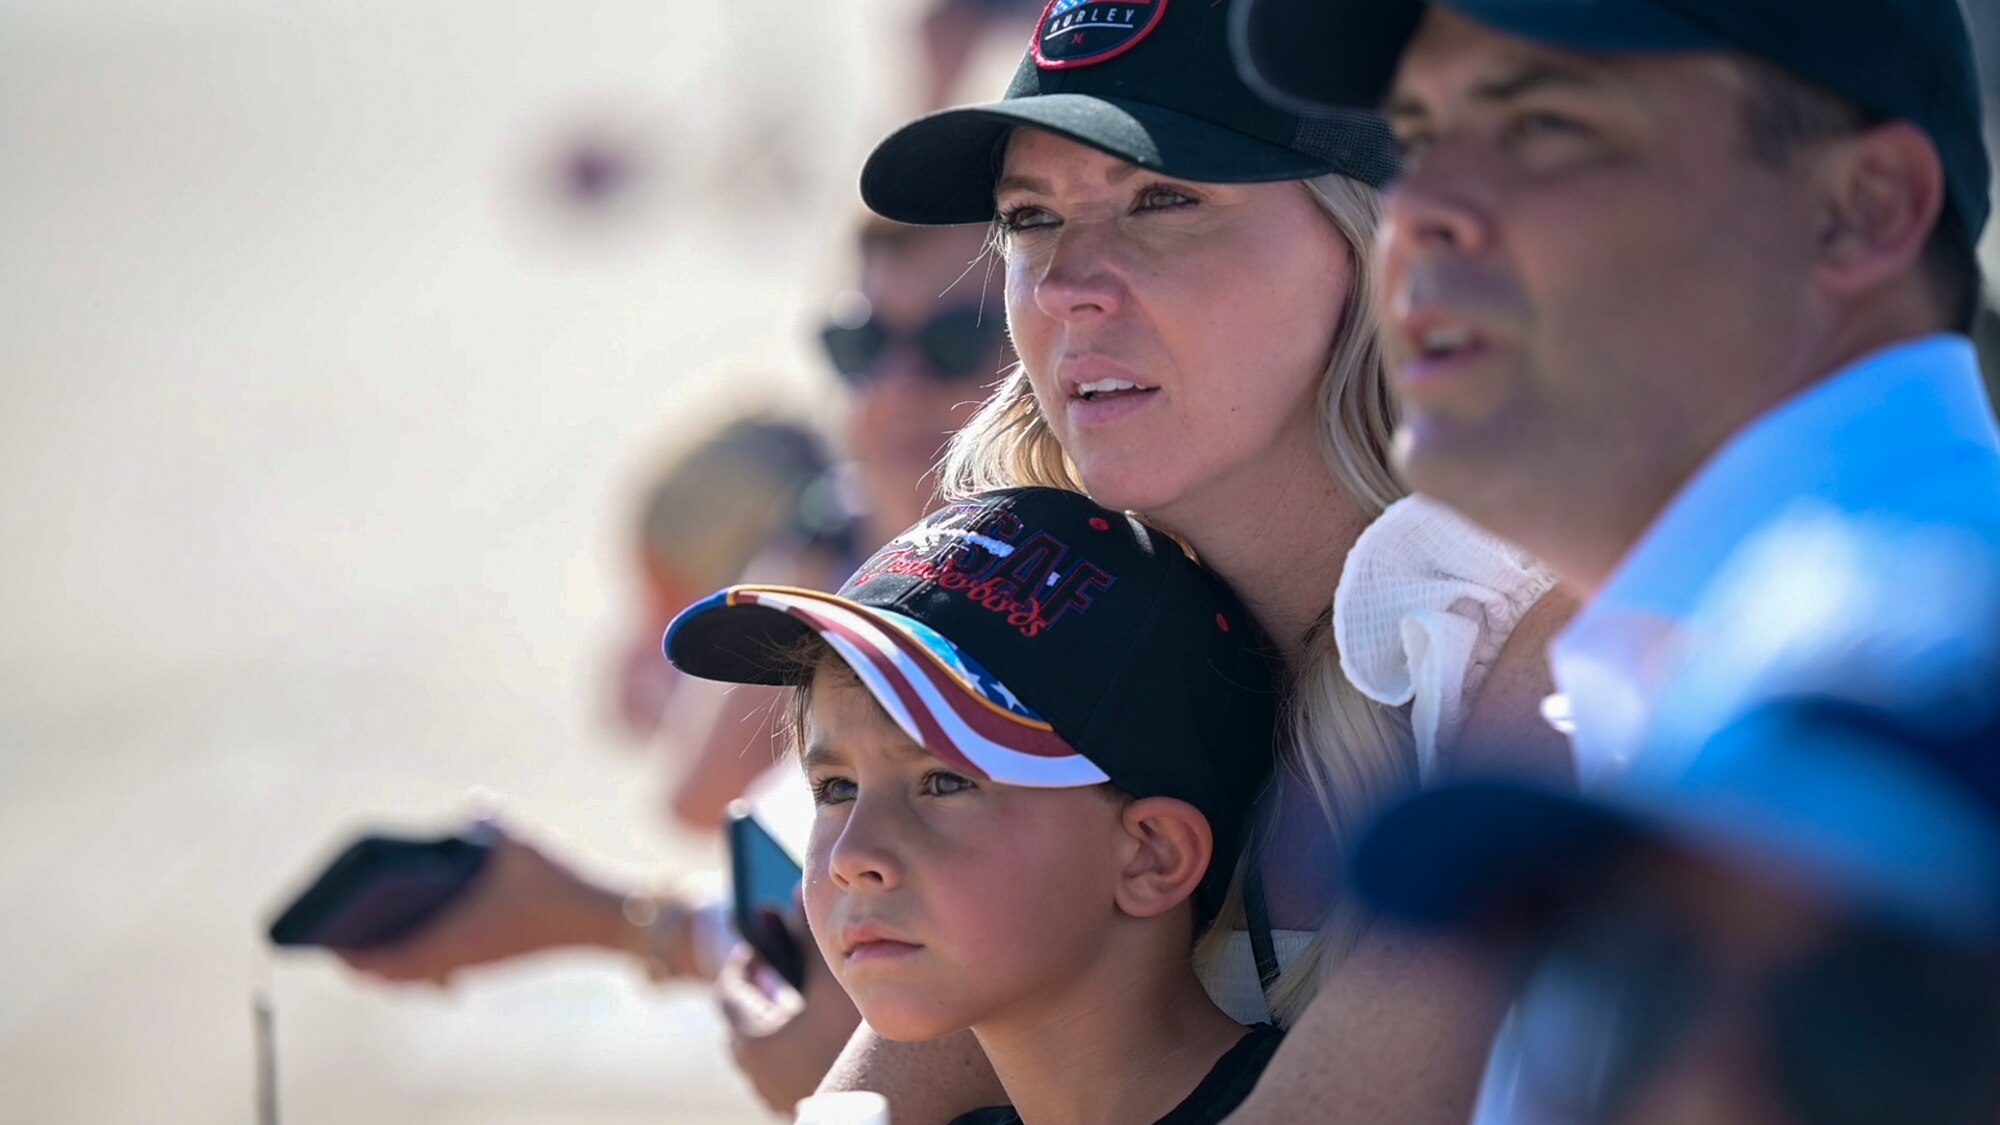 Spectators watch as the USAF Thunderbirds perform precision aerial maneuvers during the 2022 Aerospace Valley Air Show at Edwards Air Force Base. (U.S. Air Force photo by Adam Bowles)